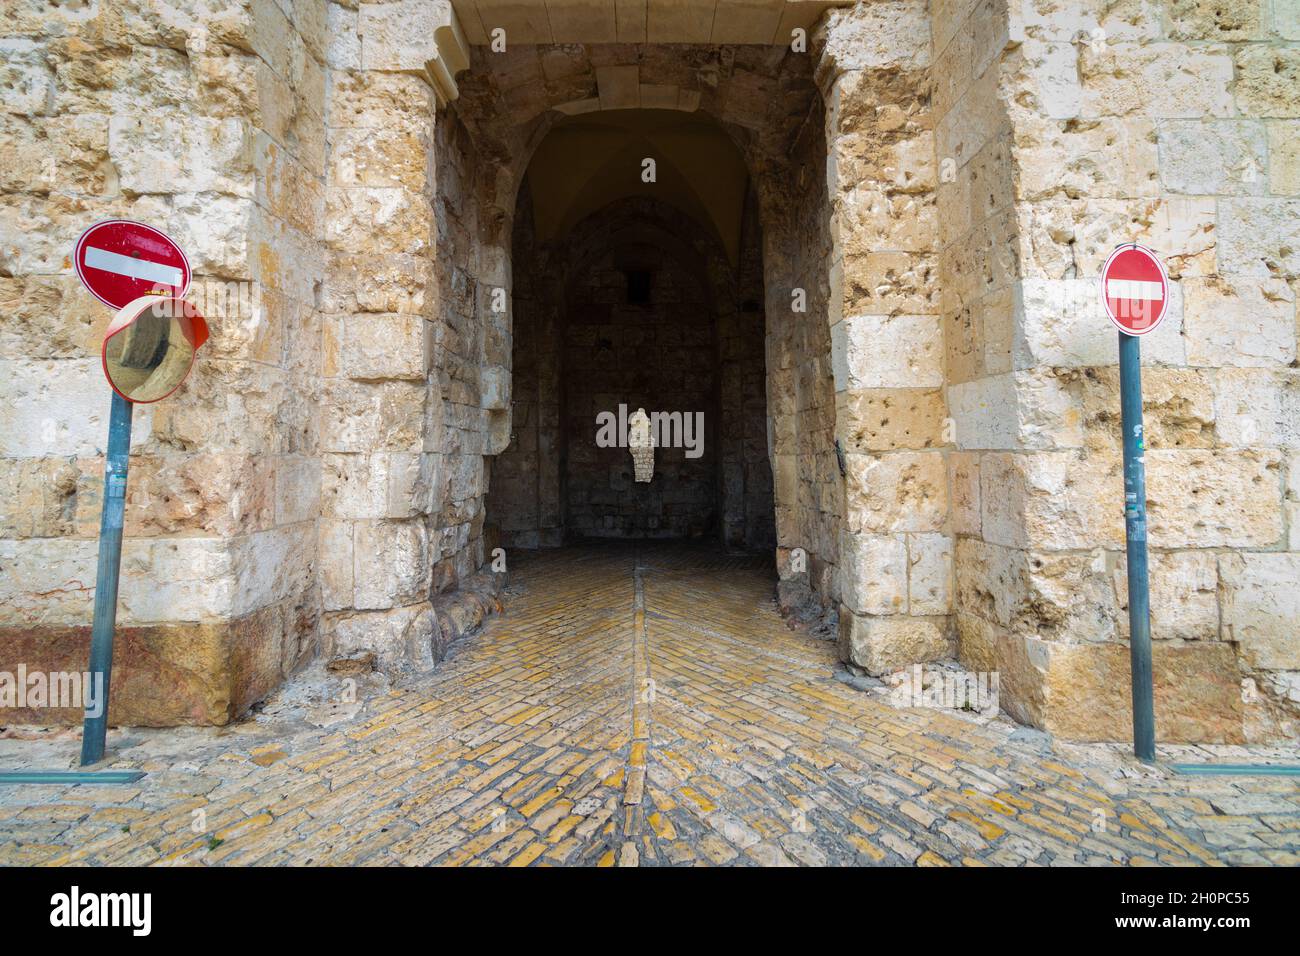 jerusalem-israel. 13-10-2021. The famous Zion Gate, within the walls of the Old City in the Jewish Quarter of Jerusalem Stock Photo